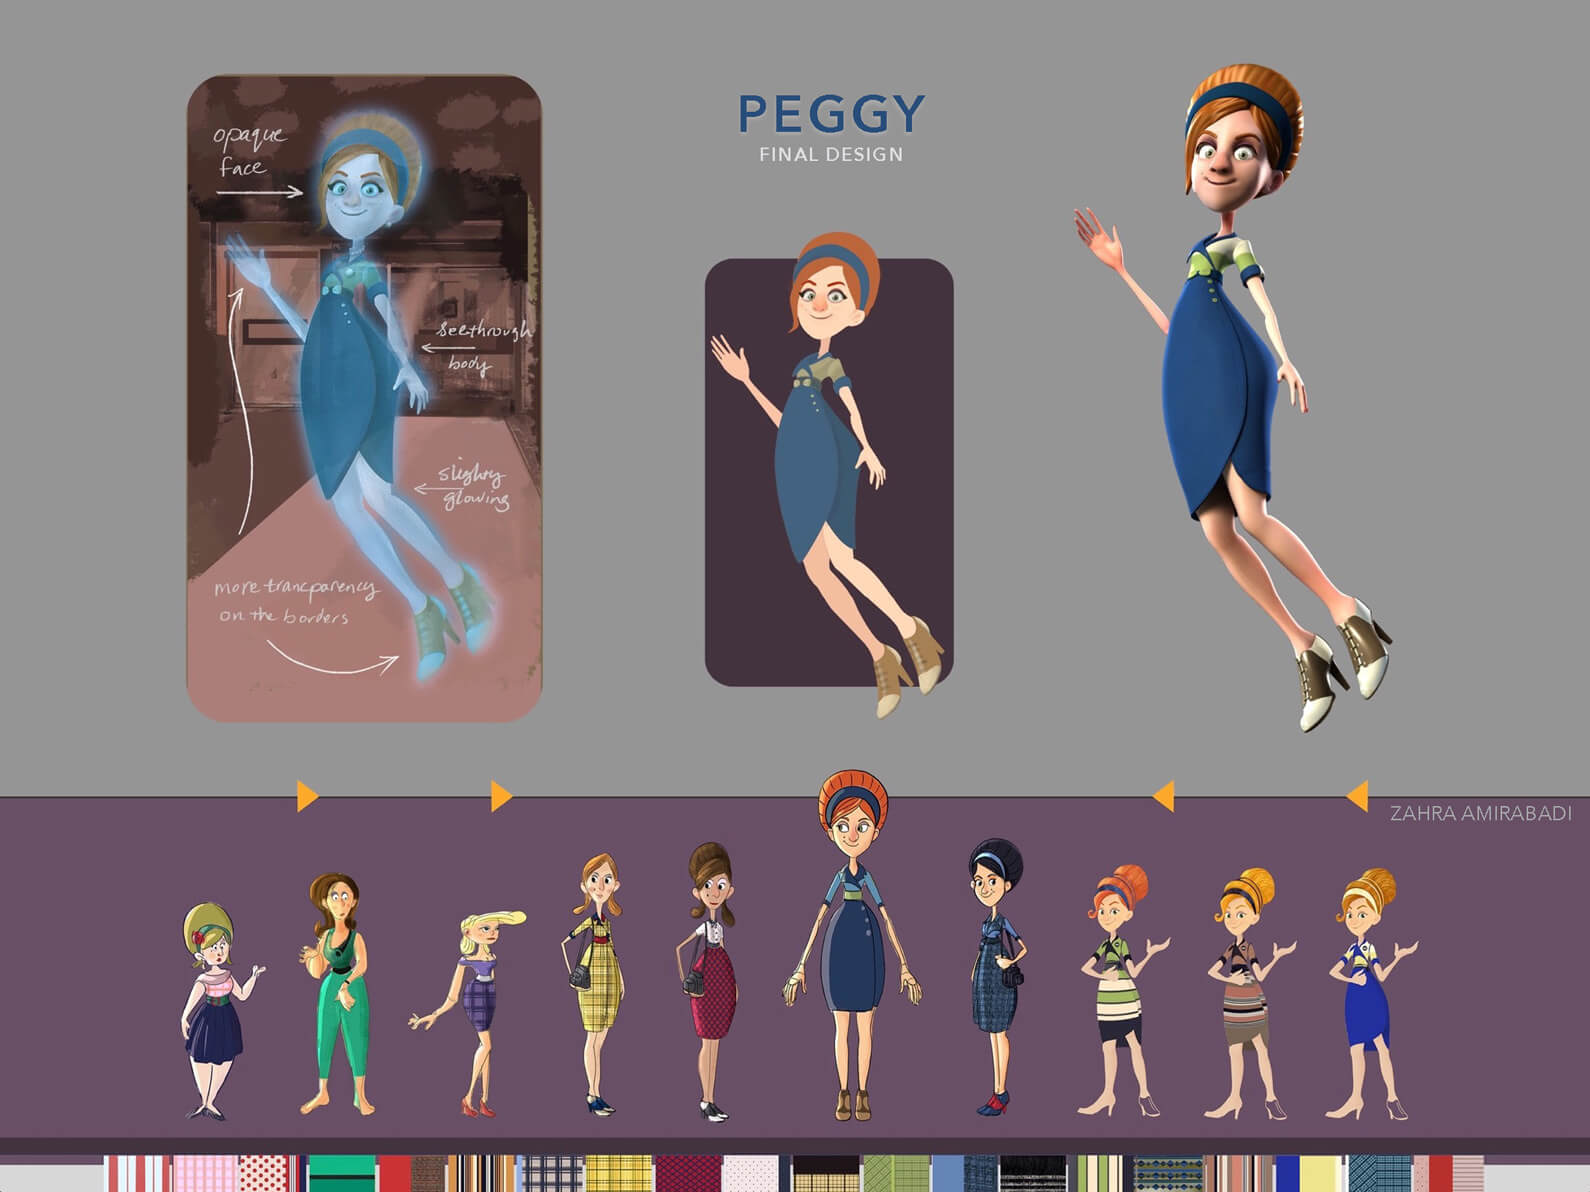 Final drawings and 3D model of Peggy in Orientation Center for the Unseen, both alive and in ghostly form